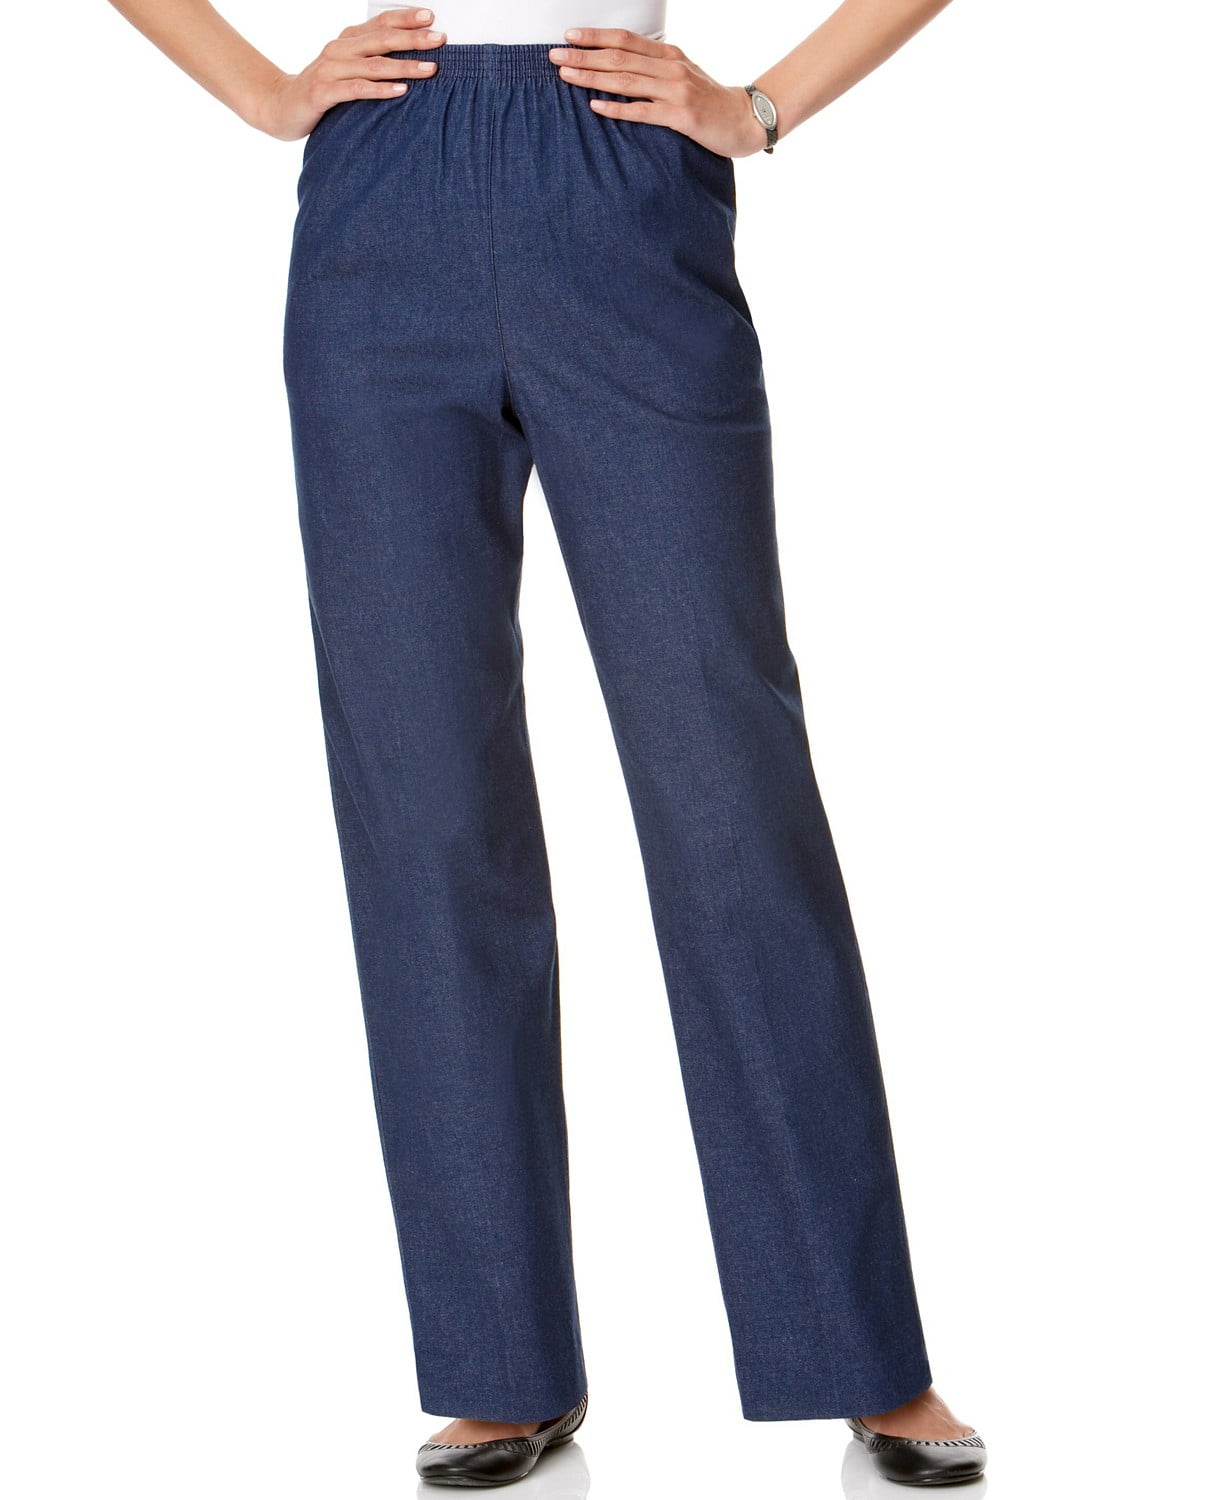 Alfred Dunner Pants - Women's 18X28 Denim Pull-On Pants Stretch 18 ...